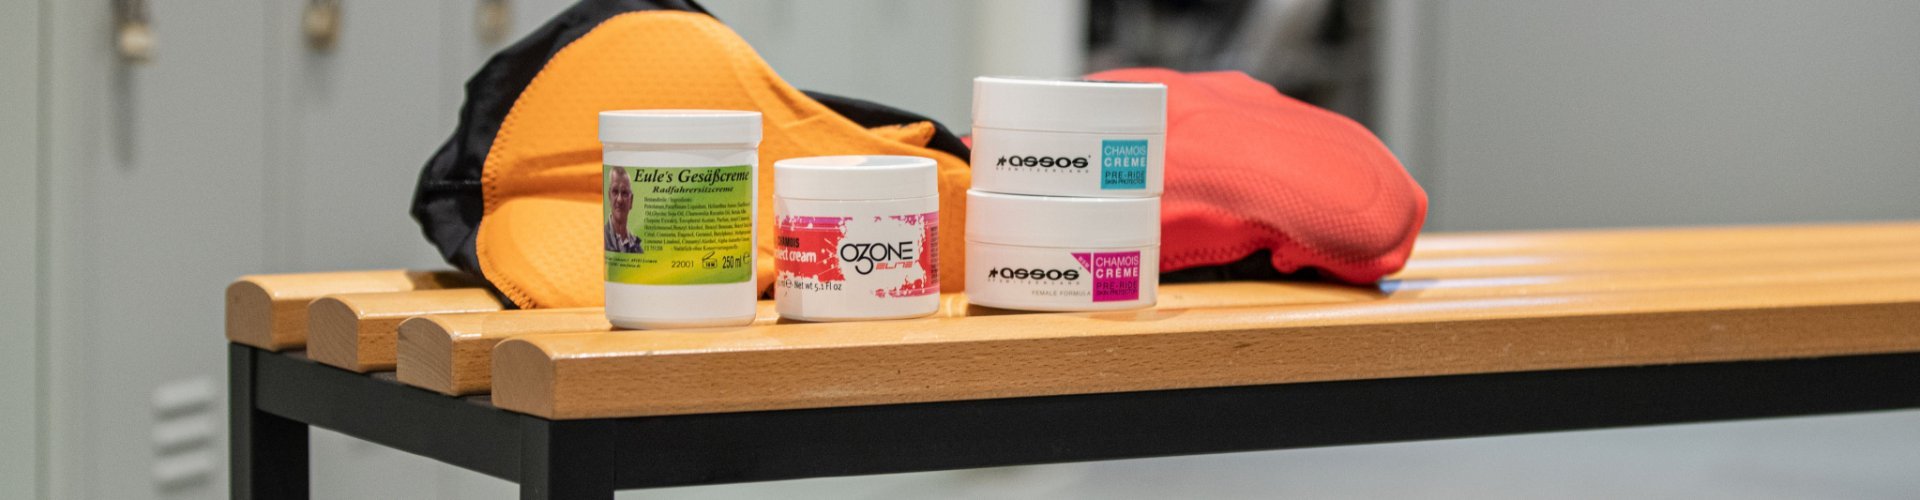 Pictured are 4 varieties of chamois cream from Elite, Assos and Eule in front of 2 bib shorts on a bench in the bc men's locker room.